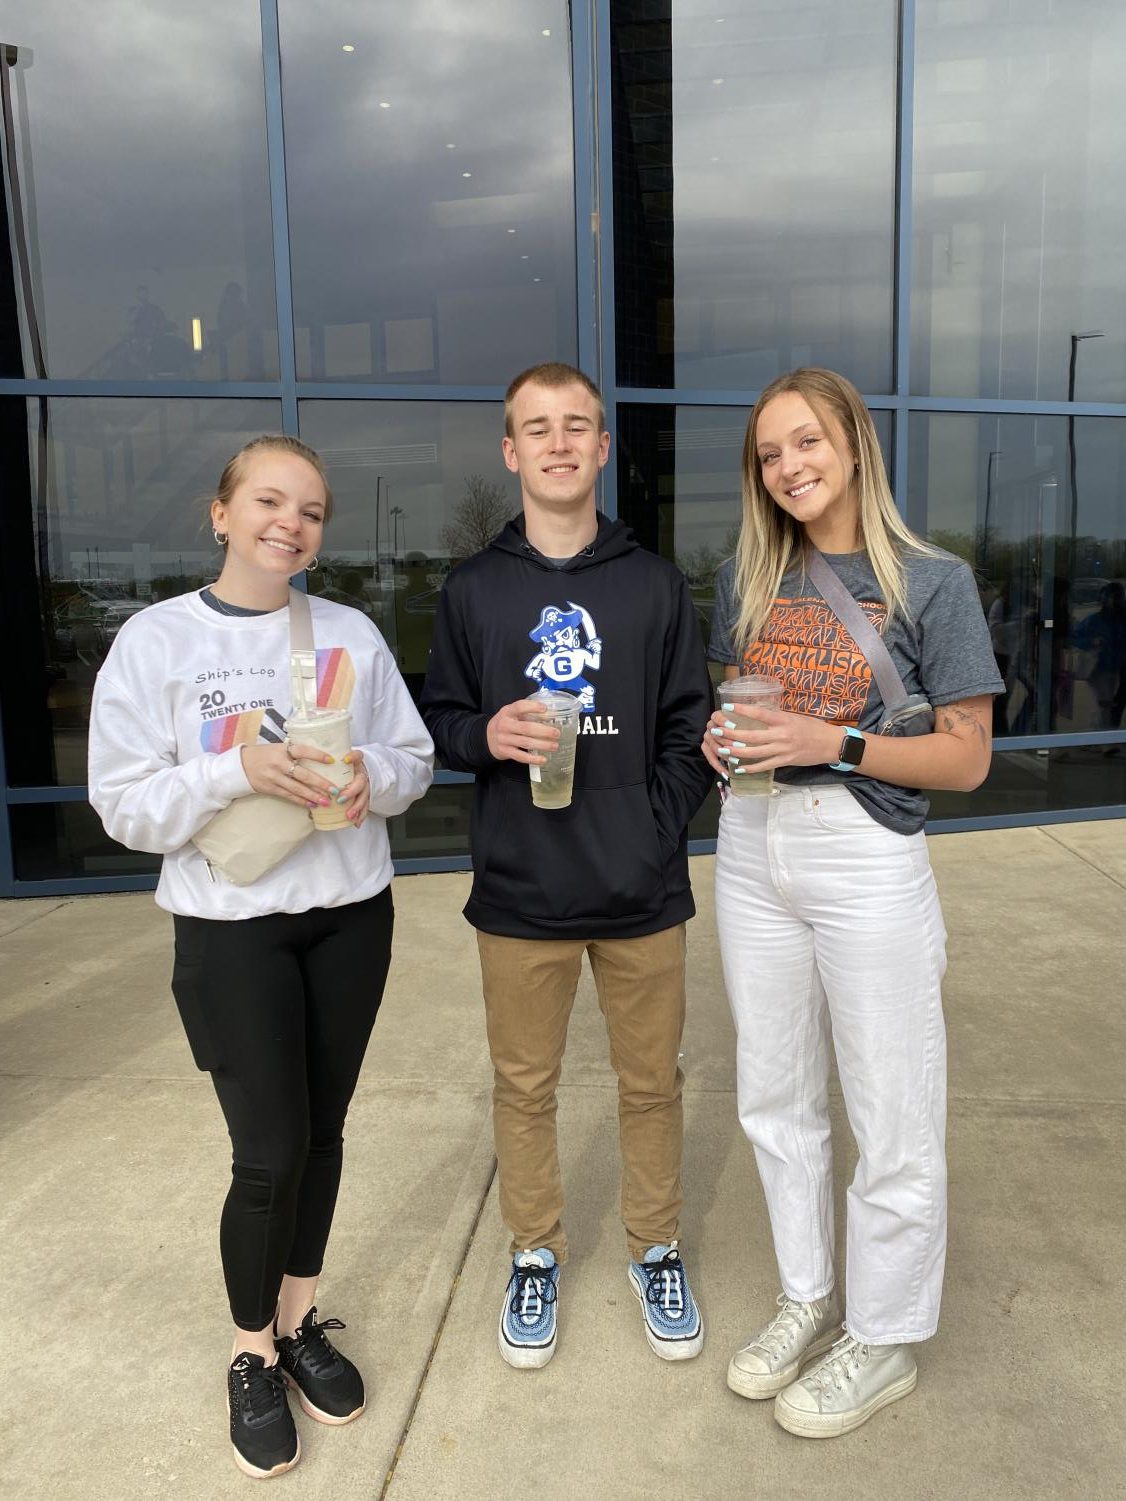 Kennedy Trautsch ‘23, Jenna Smith ‘23, and Sam Eaton ‘23 are armed with coffee, prepare to take on the state journalism competition on April 21. “I was very surprised that I was able to make it two years in a row,” said Smith. “I think it was a great accomplishment and I will remember it for many years. Along with being able to compete, being there with some of my fellow classmates made the experience even more amazing and fun.”